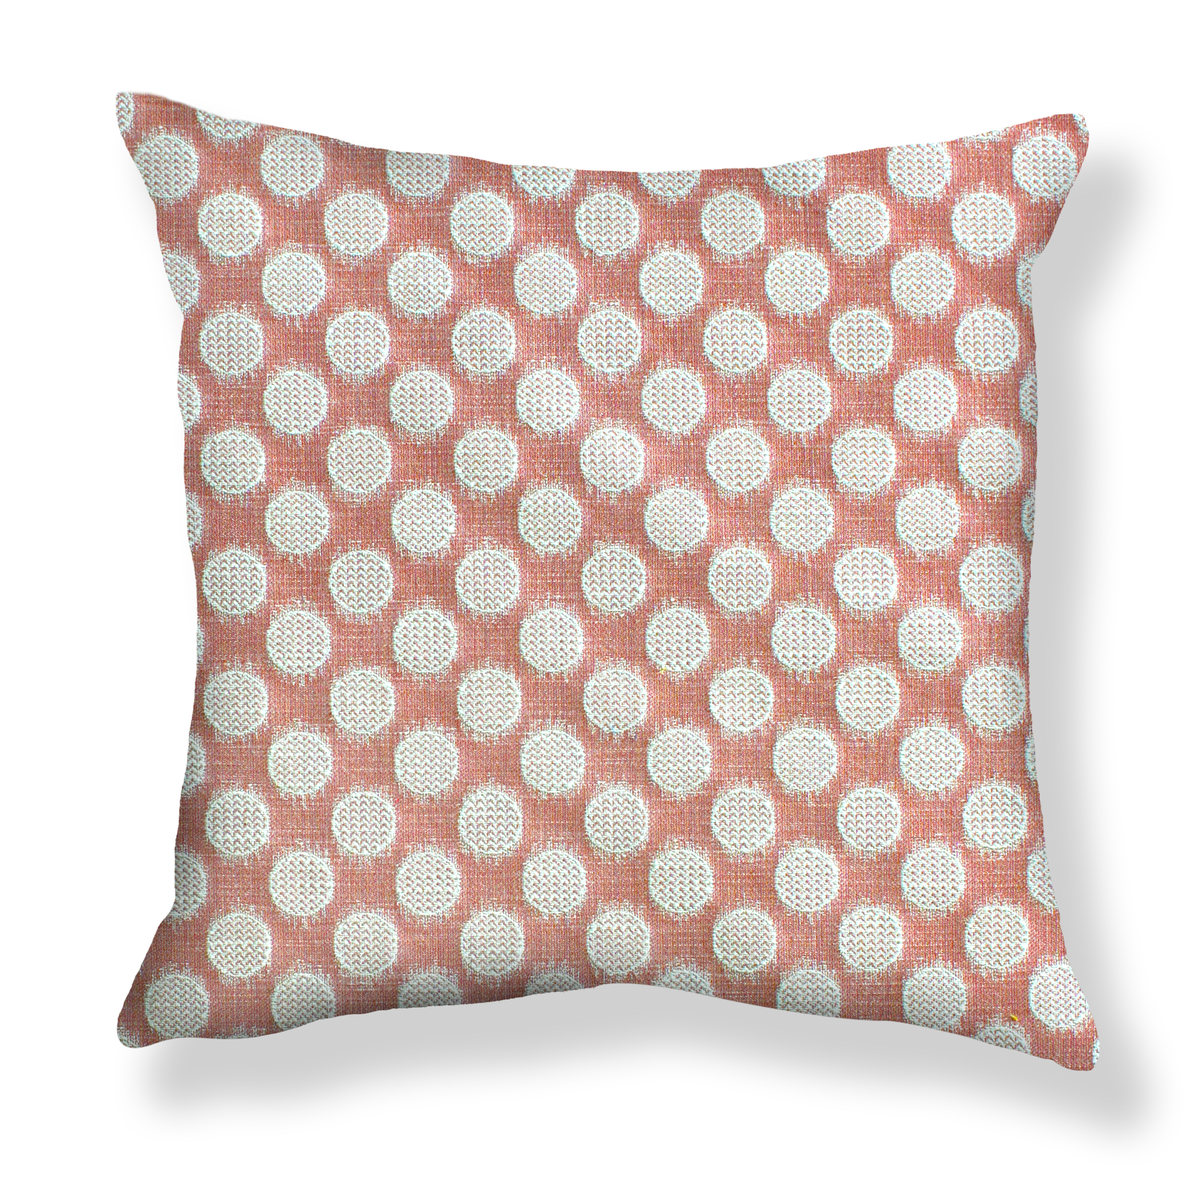 Chevron Dots Pillow in Pink